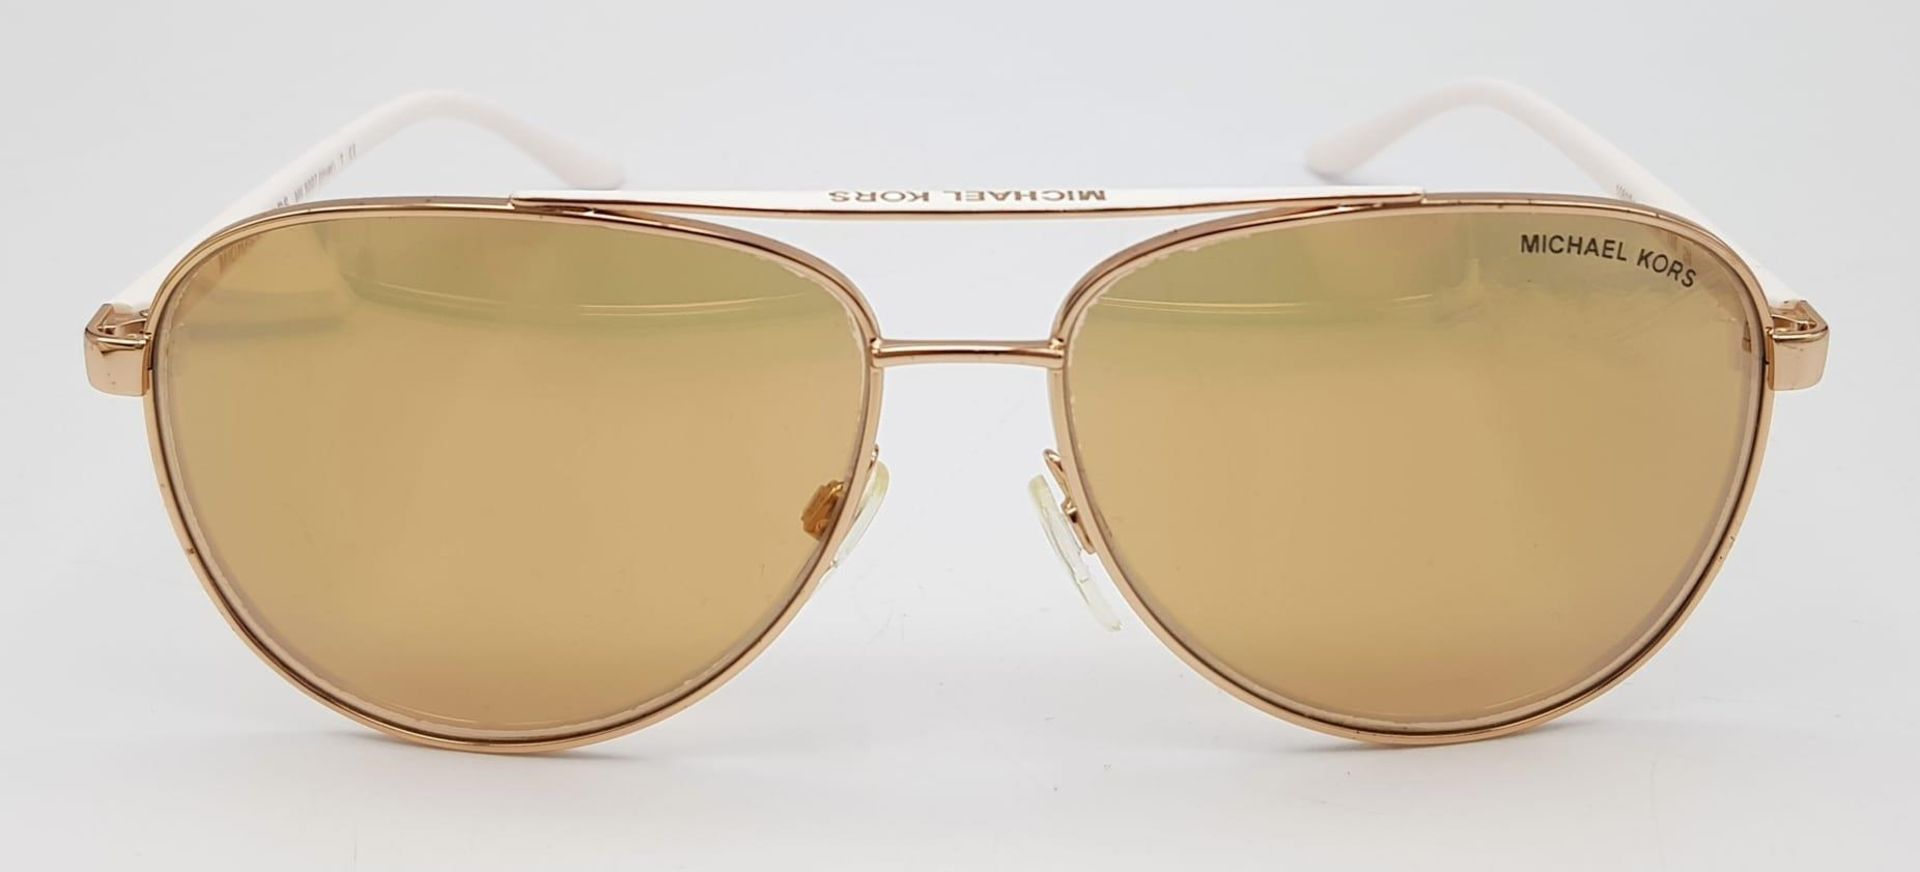 A Pair of Michael Kors Sunglasses with Case. - Image 2 of 7